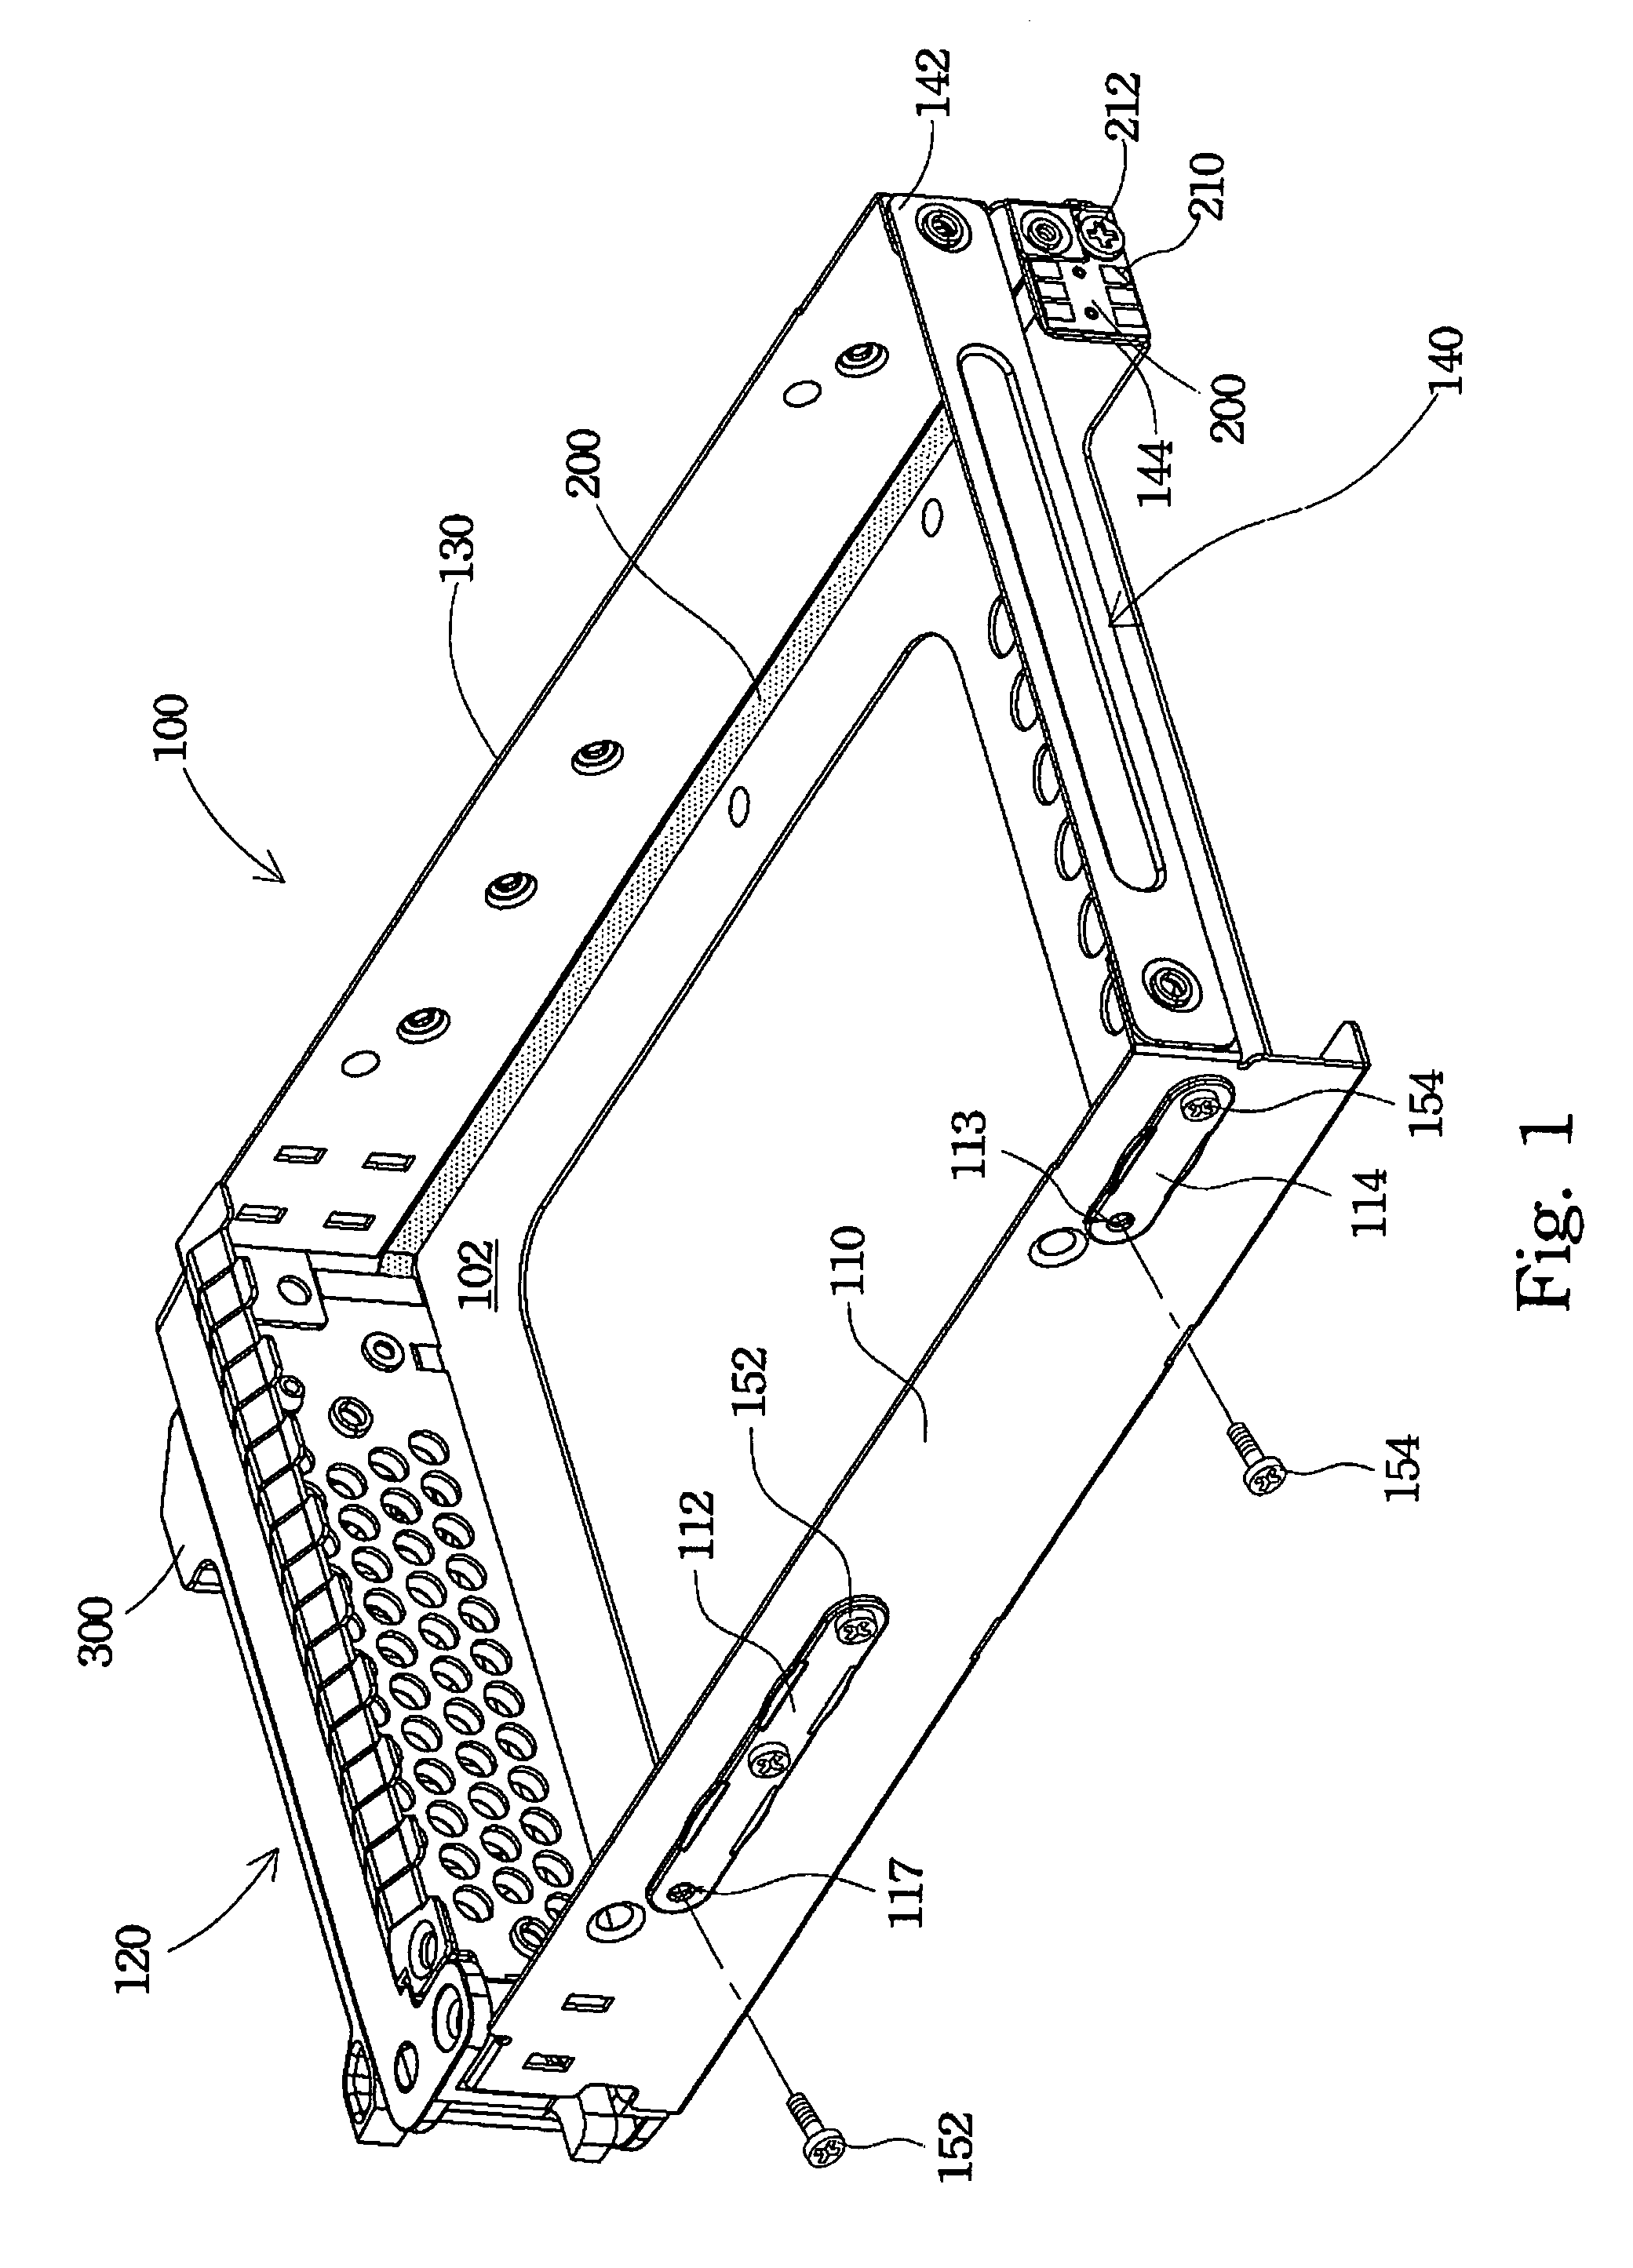 Hard disk drive tray structure with flex circuit extending between exposed sides and connected to metal pad and indicator